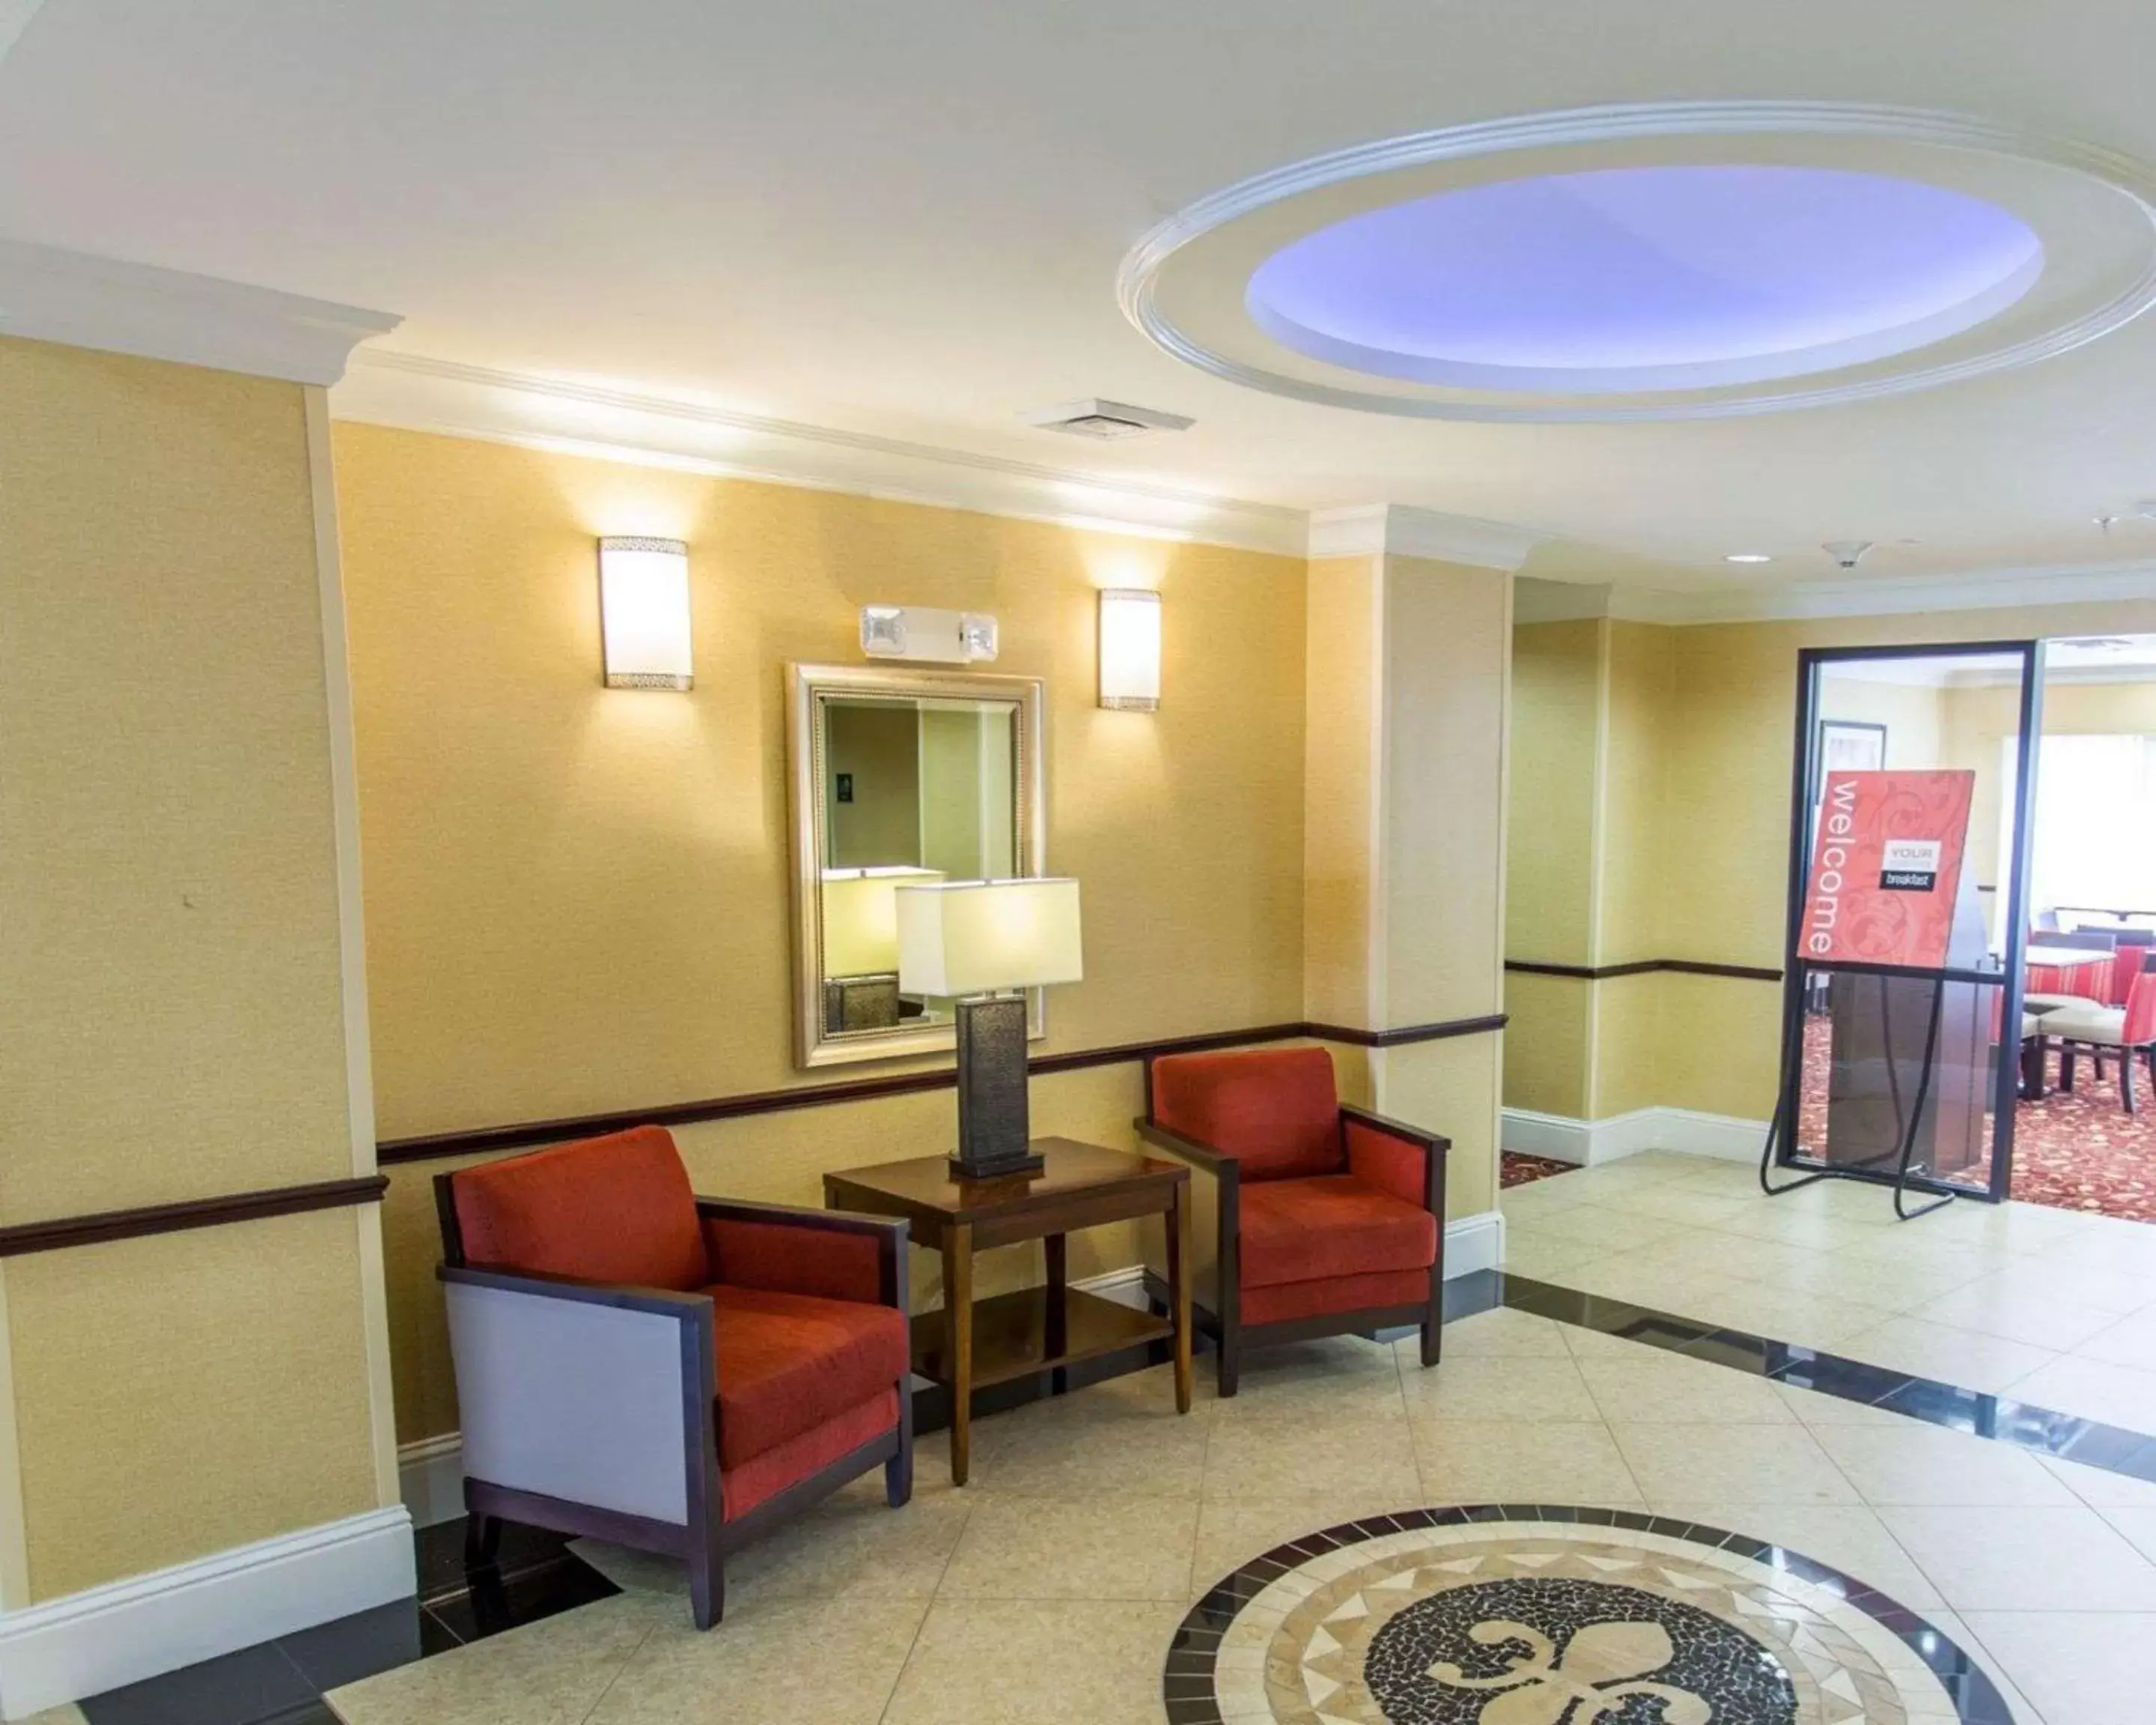 Lobby or reception in Comfort Inn New Orleans Airport South